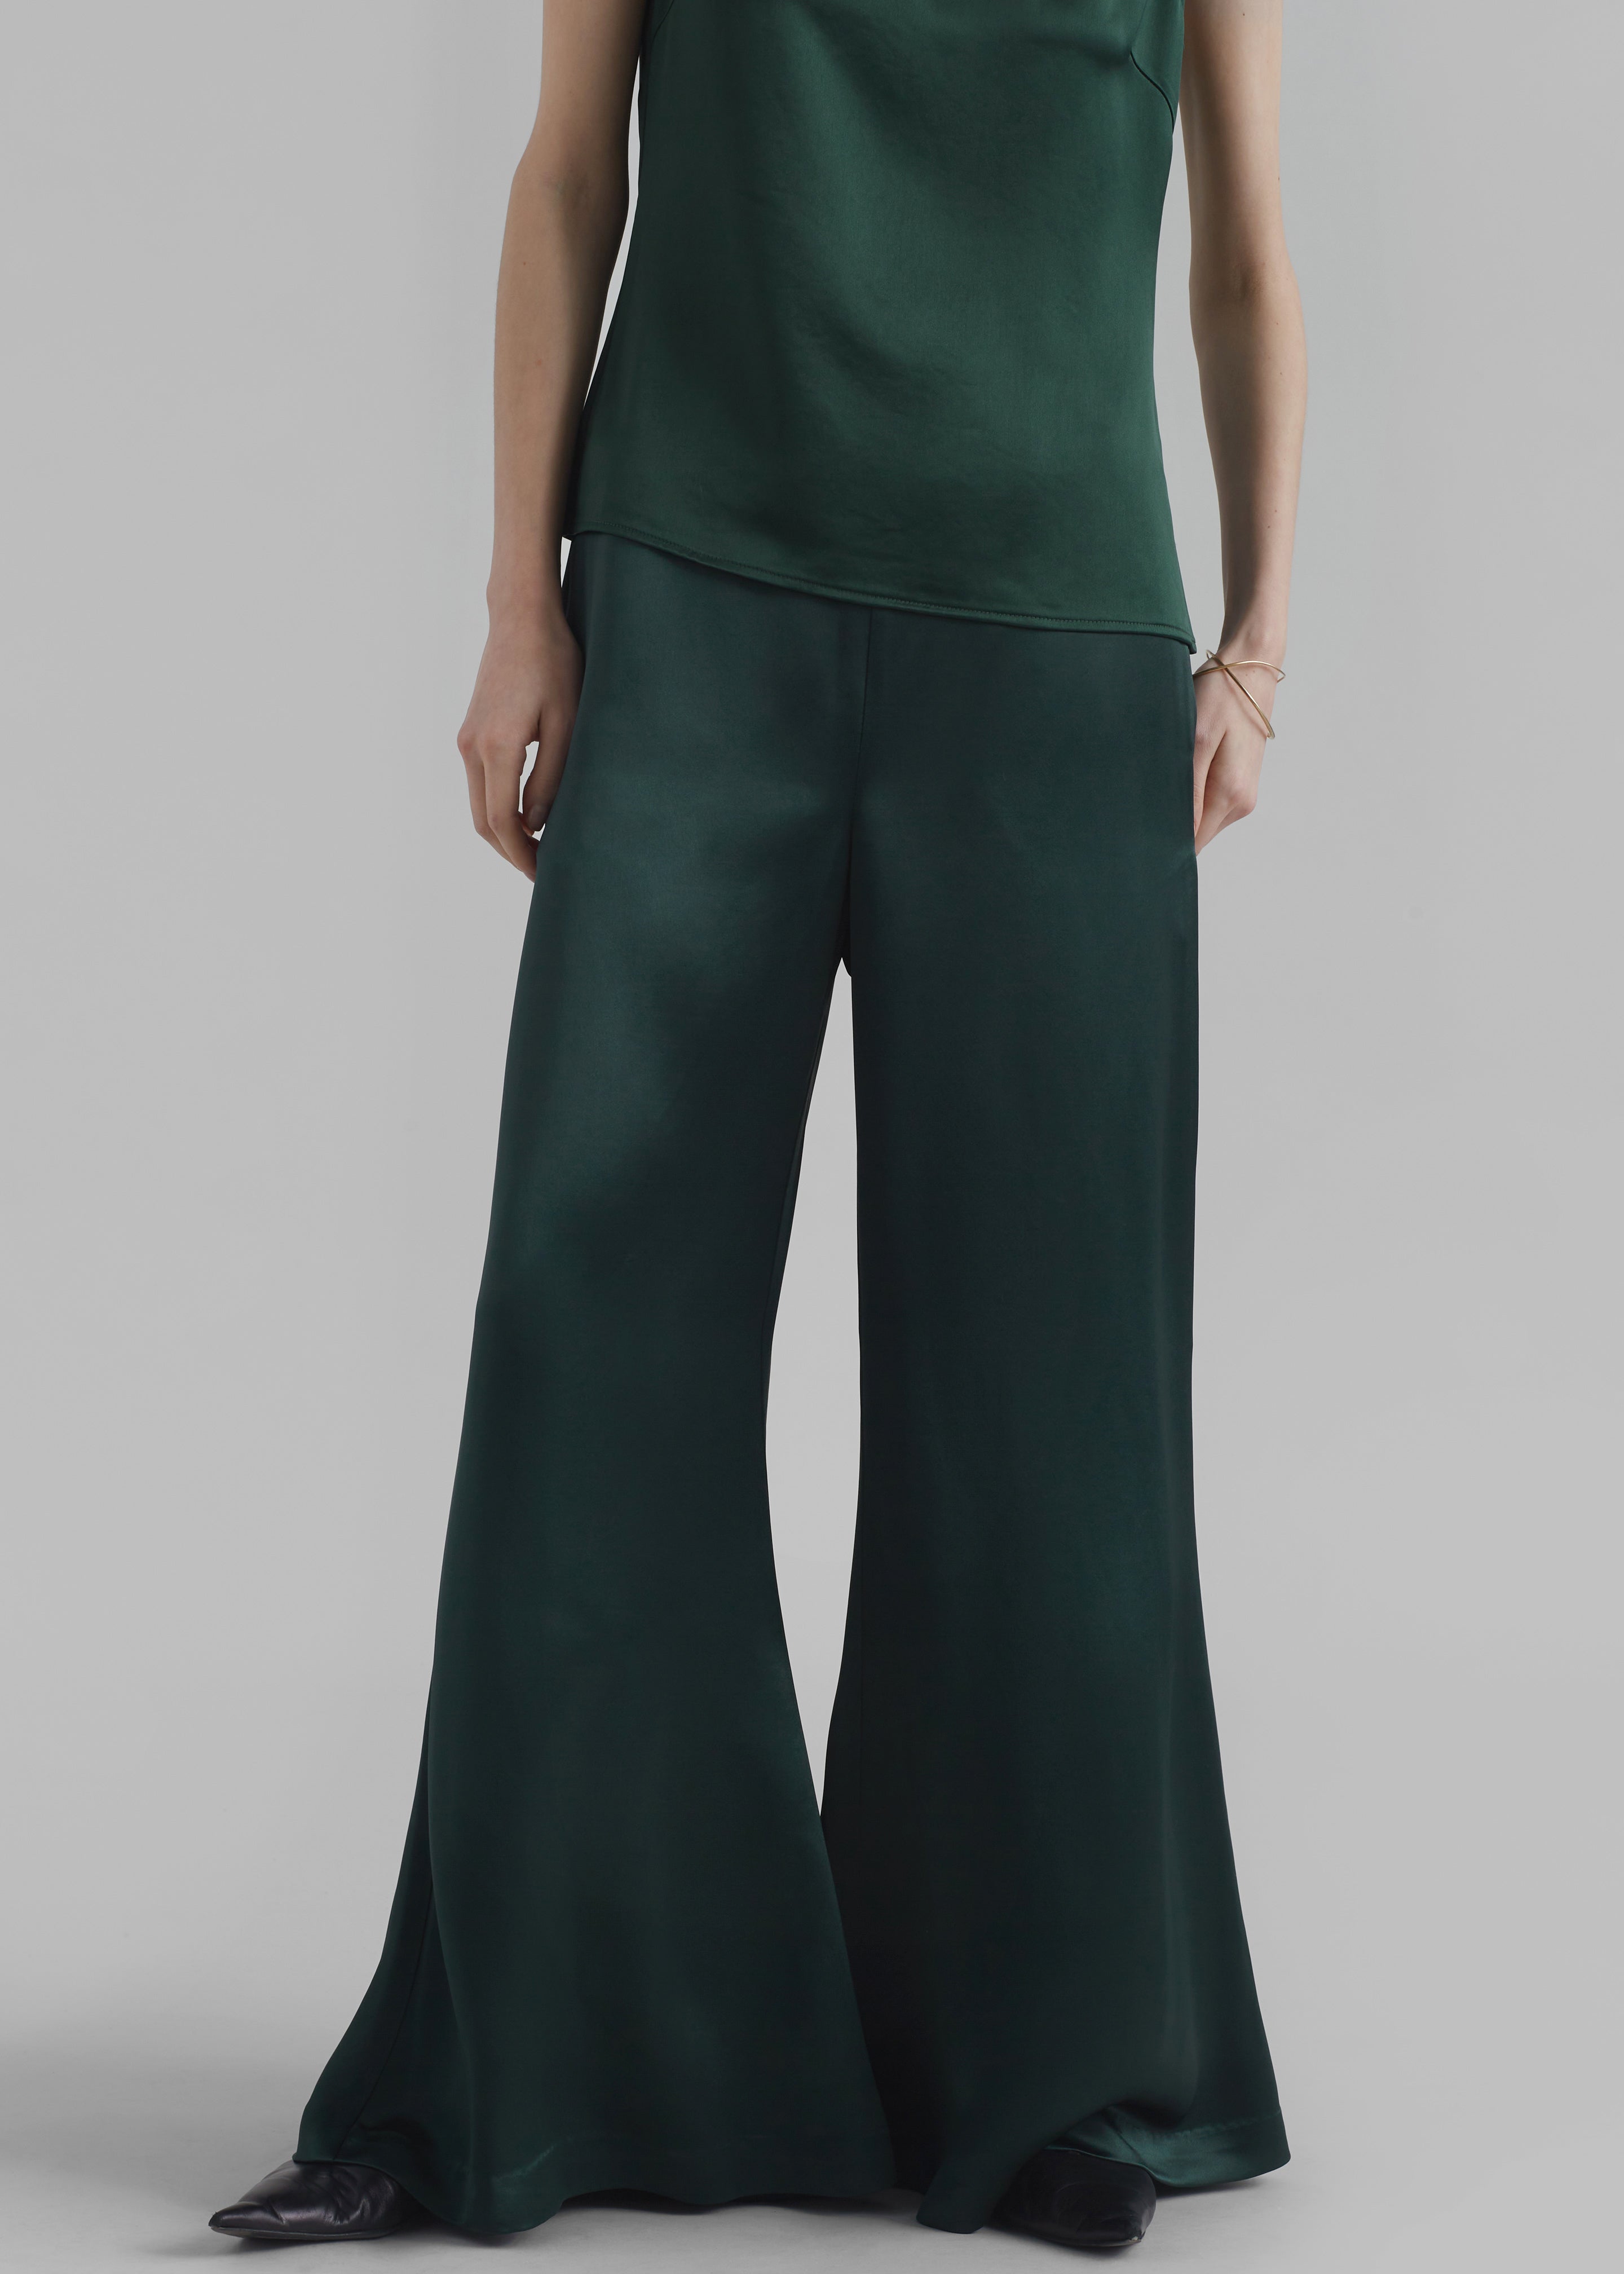 By Malene Birger Lucee Flared Trousers - Sycamore - 2